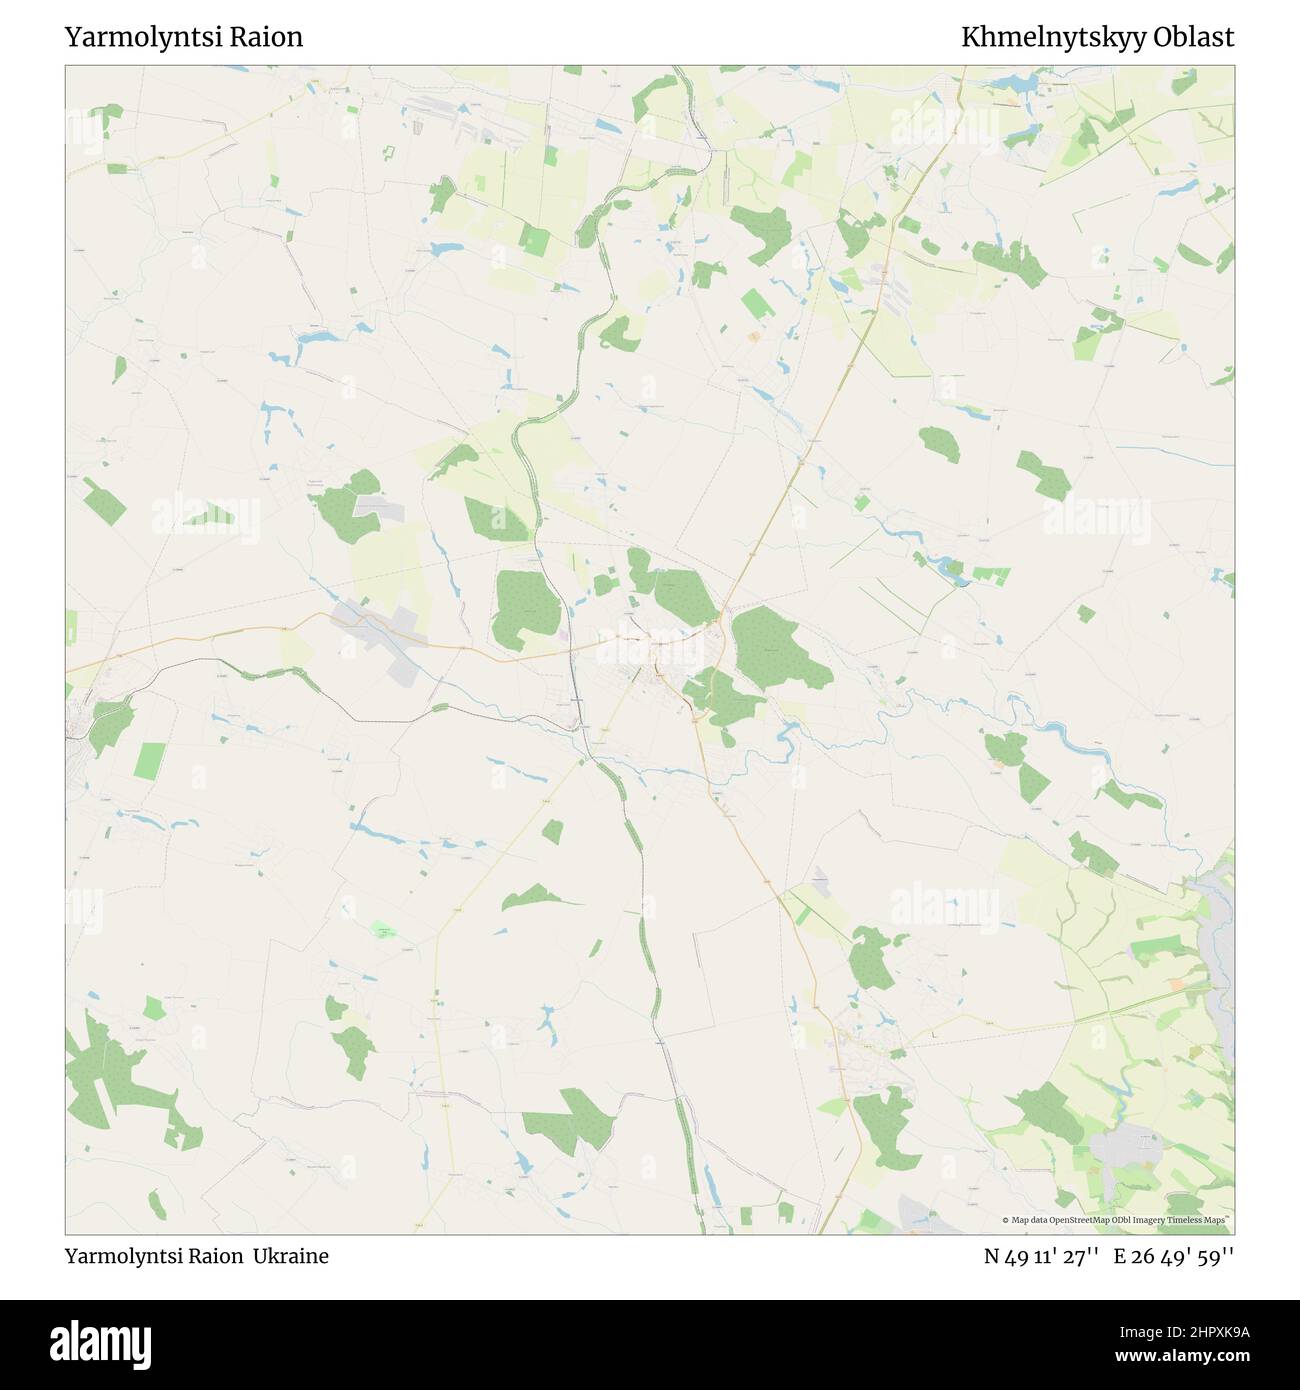 Yarmolyntsi Raion, Yarmolyntsi Raion, Ukraine, Khmelnytskyy Oblast, N 49 11' 27'', E 26 49' 59'', map, Timeless Map published in 2021. Travelers, explorers and adventurers like Florence Nightingale, David Livingstone, Ernest Shackleton, Lewis and Clark and Sherlock Holmes relied on maps to plan travels to the world's most remote corners, Timeless Maps is mapping most locations on the globe, showing the achievement of great dreams Stock Photo